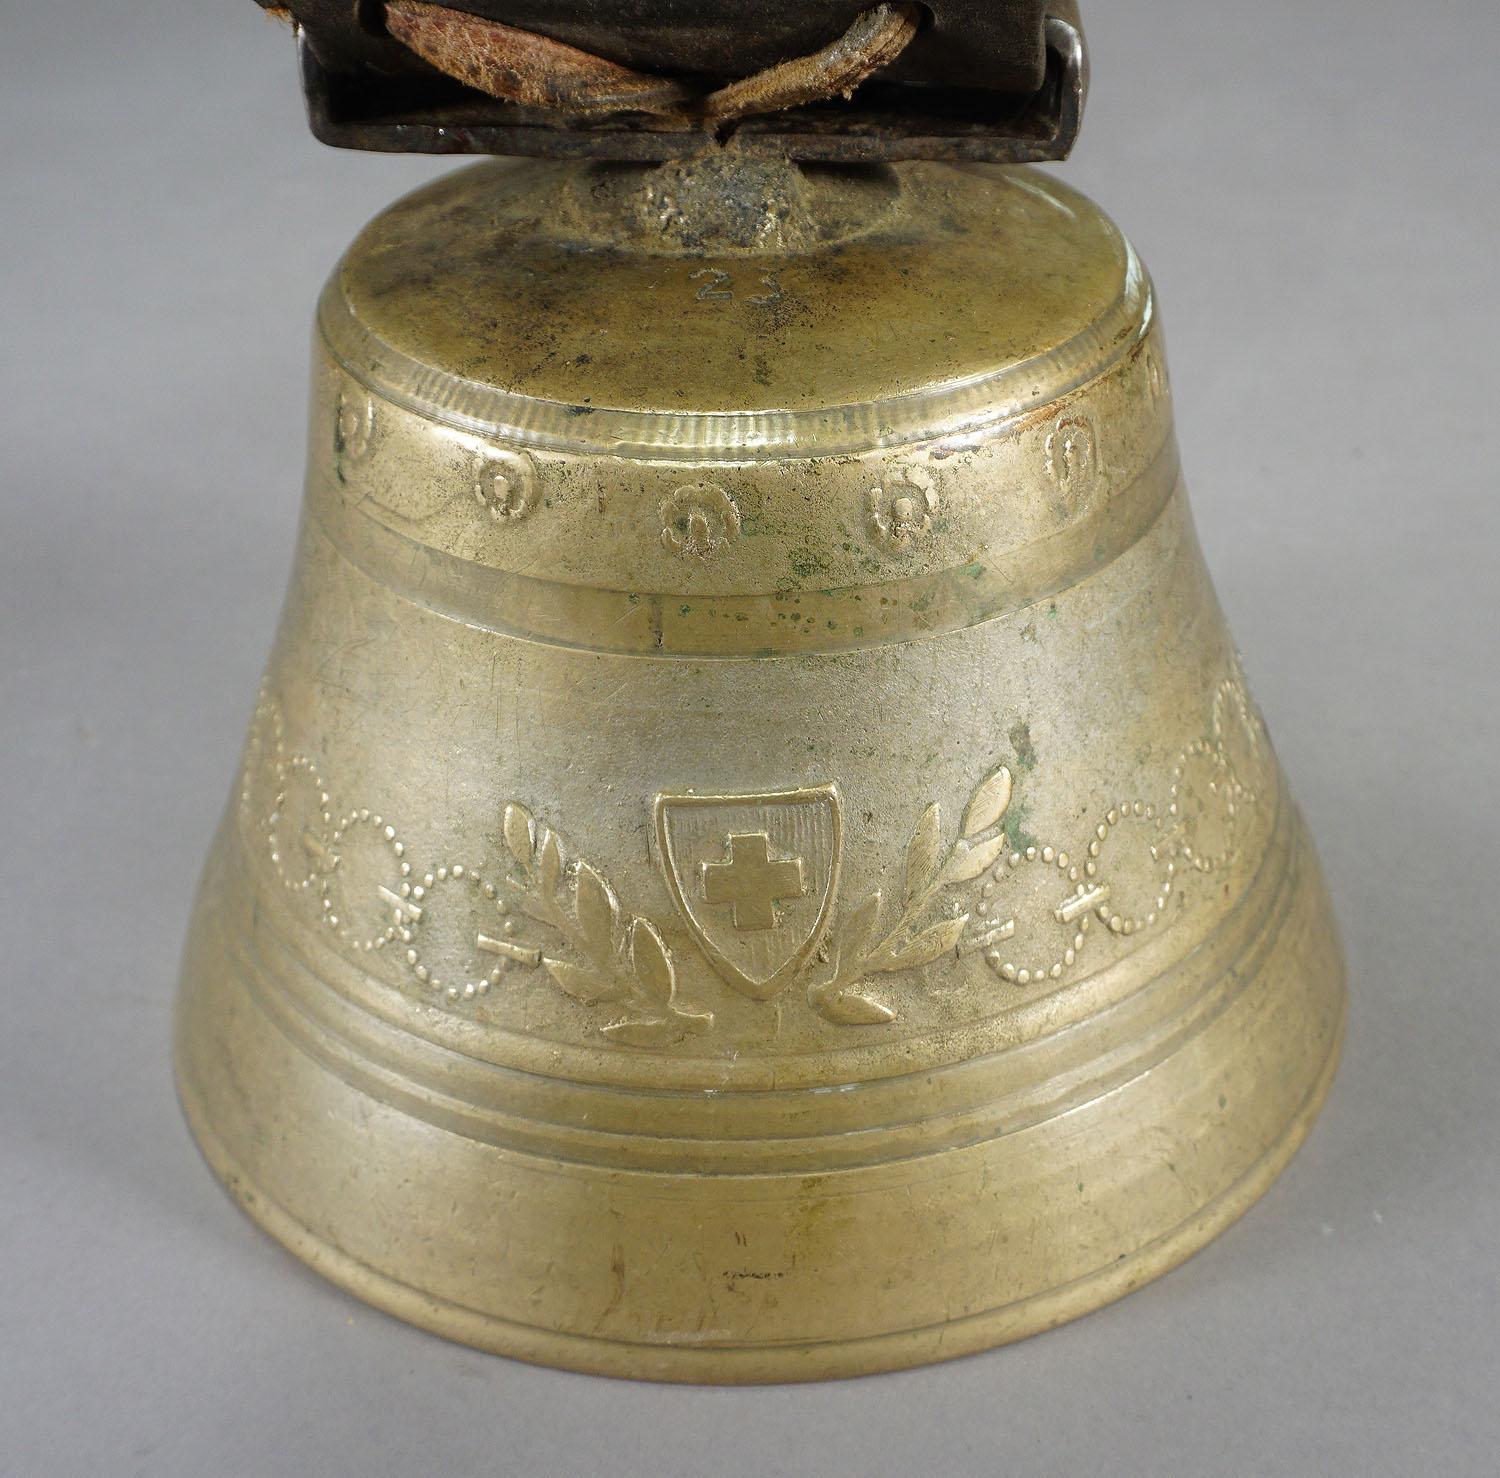 Swiss Antique Casted Bronze Cow Bell with Leather Strap, Switzerland, ca. 1900